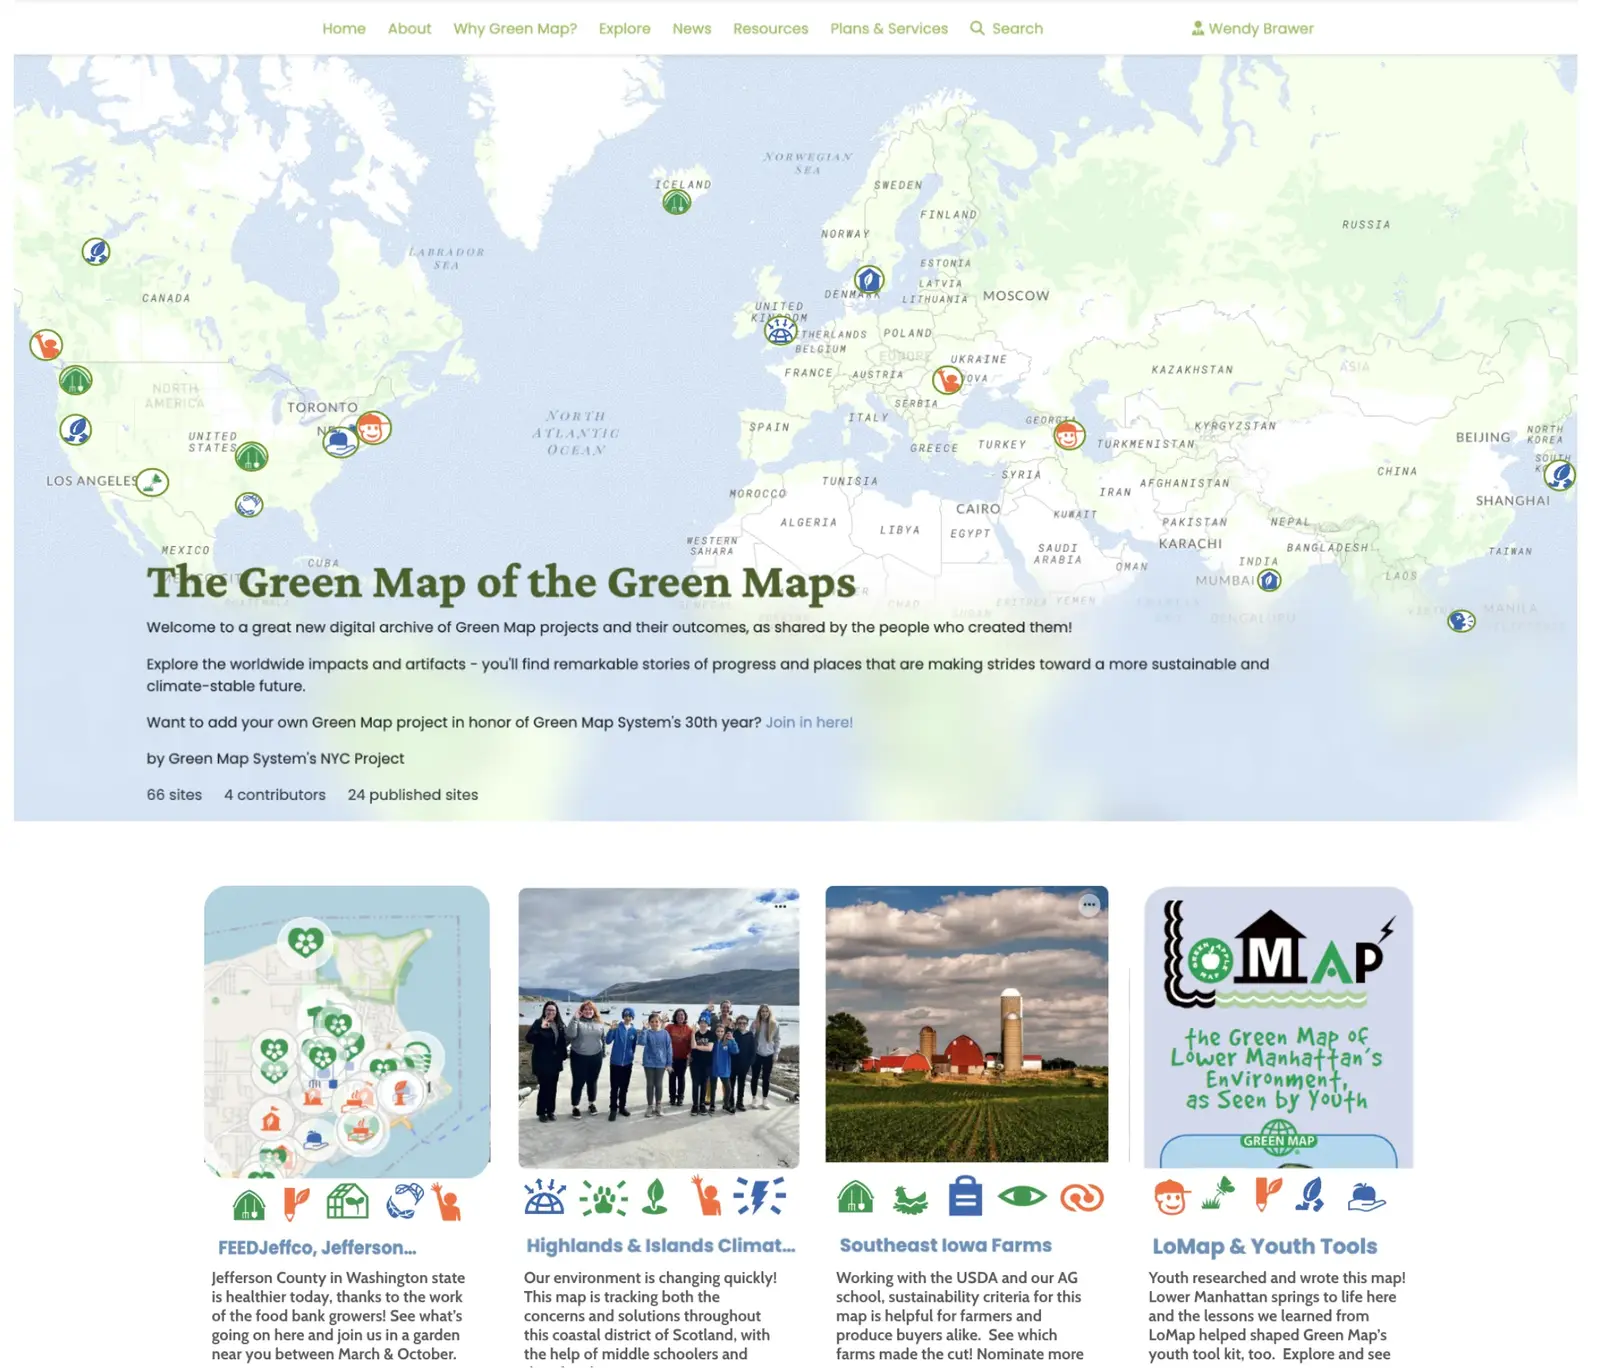                                                     Map of the Maps is the vision for a digital archive made with Green Mapmakers